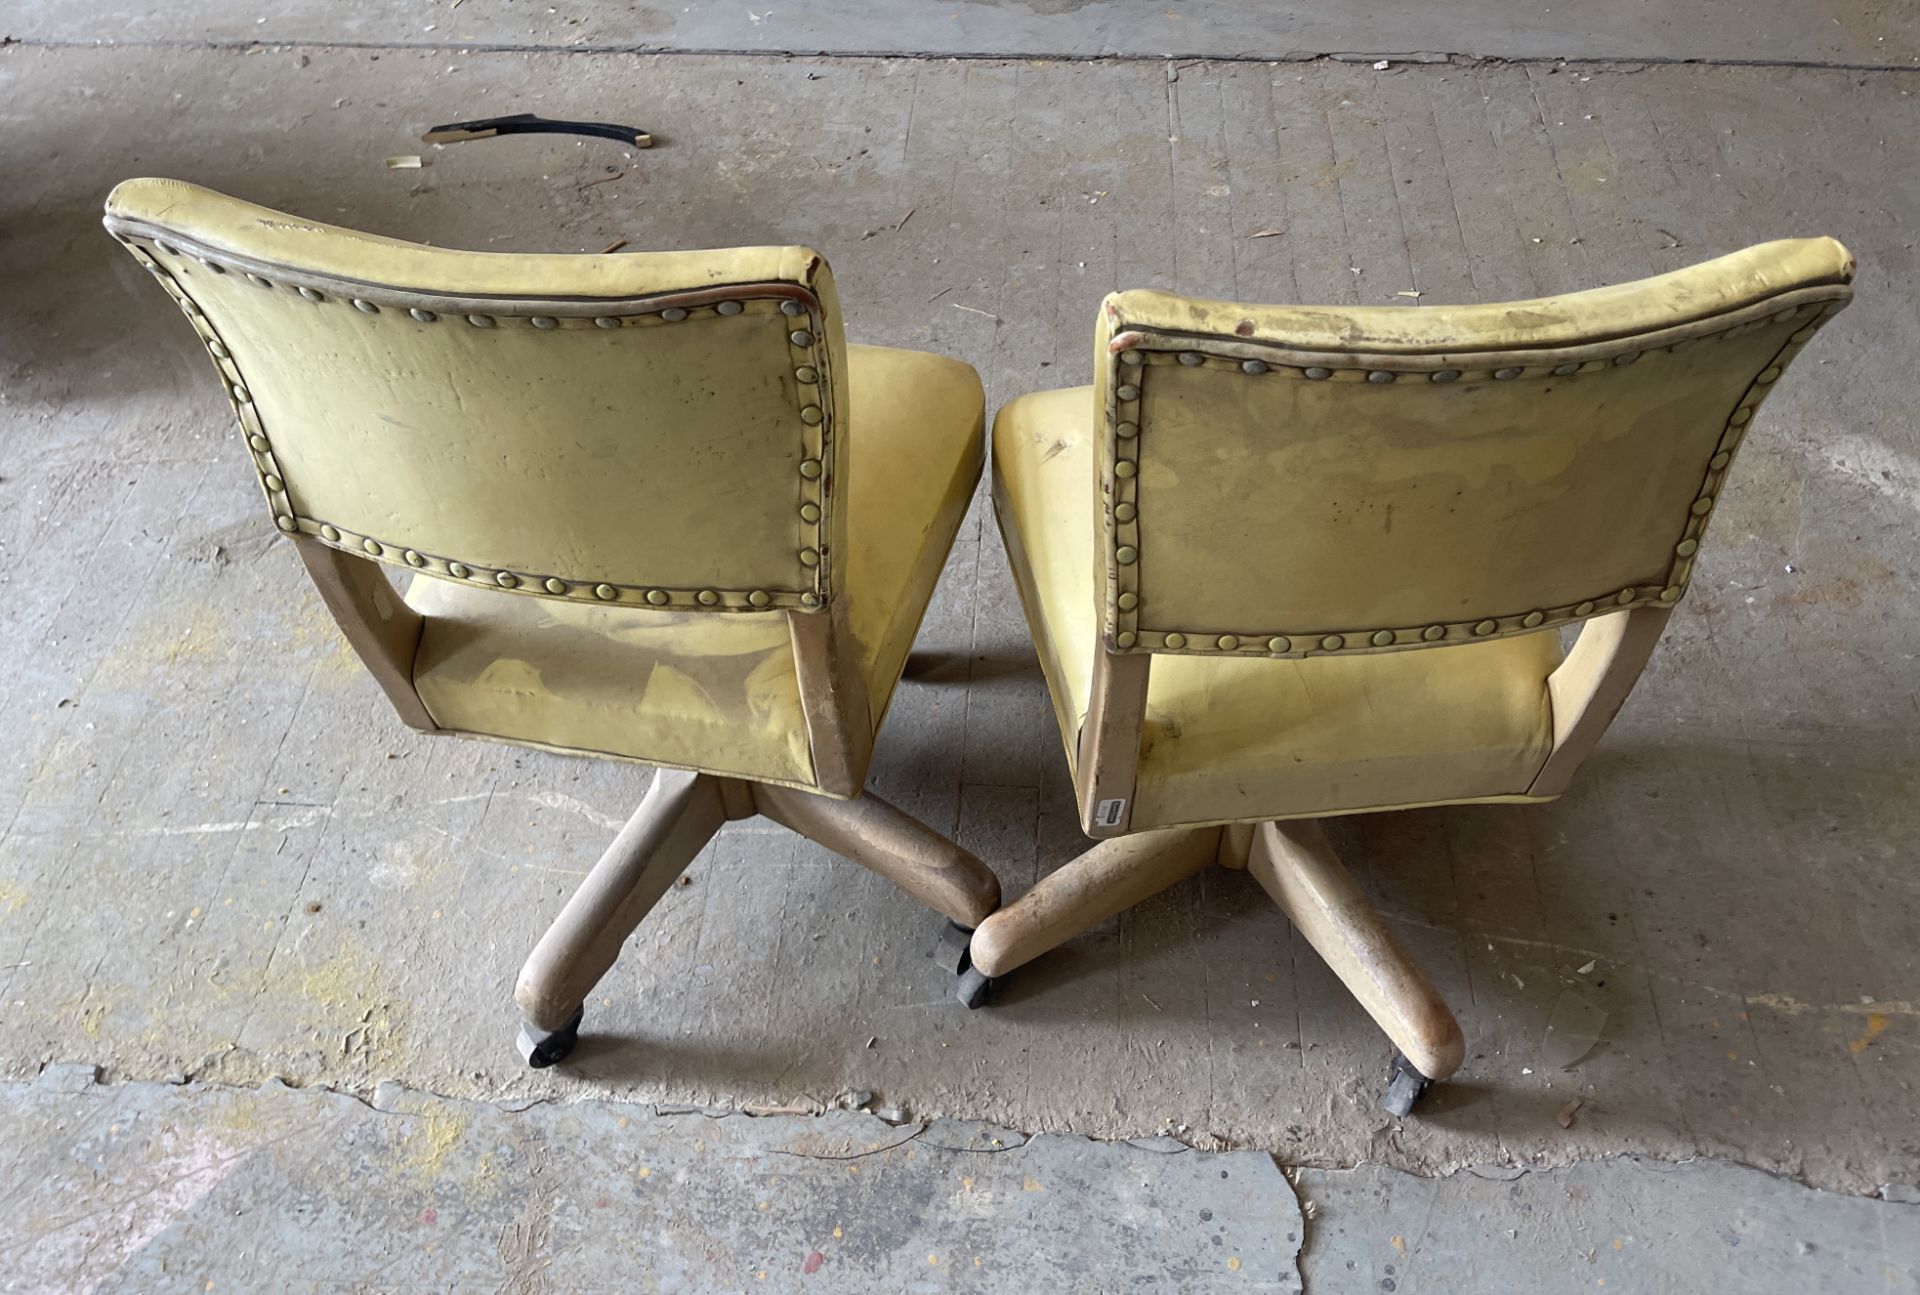 2 STOW AND DAVID FURNITURE CO ART DECO VINTAGE YELLOW CHAIRS - Image 2 of 3